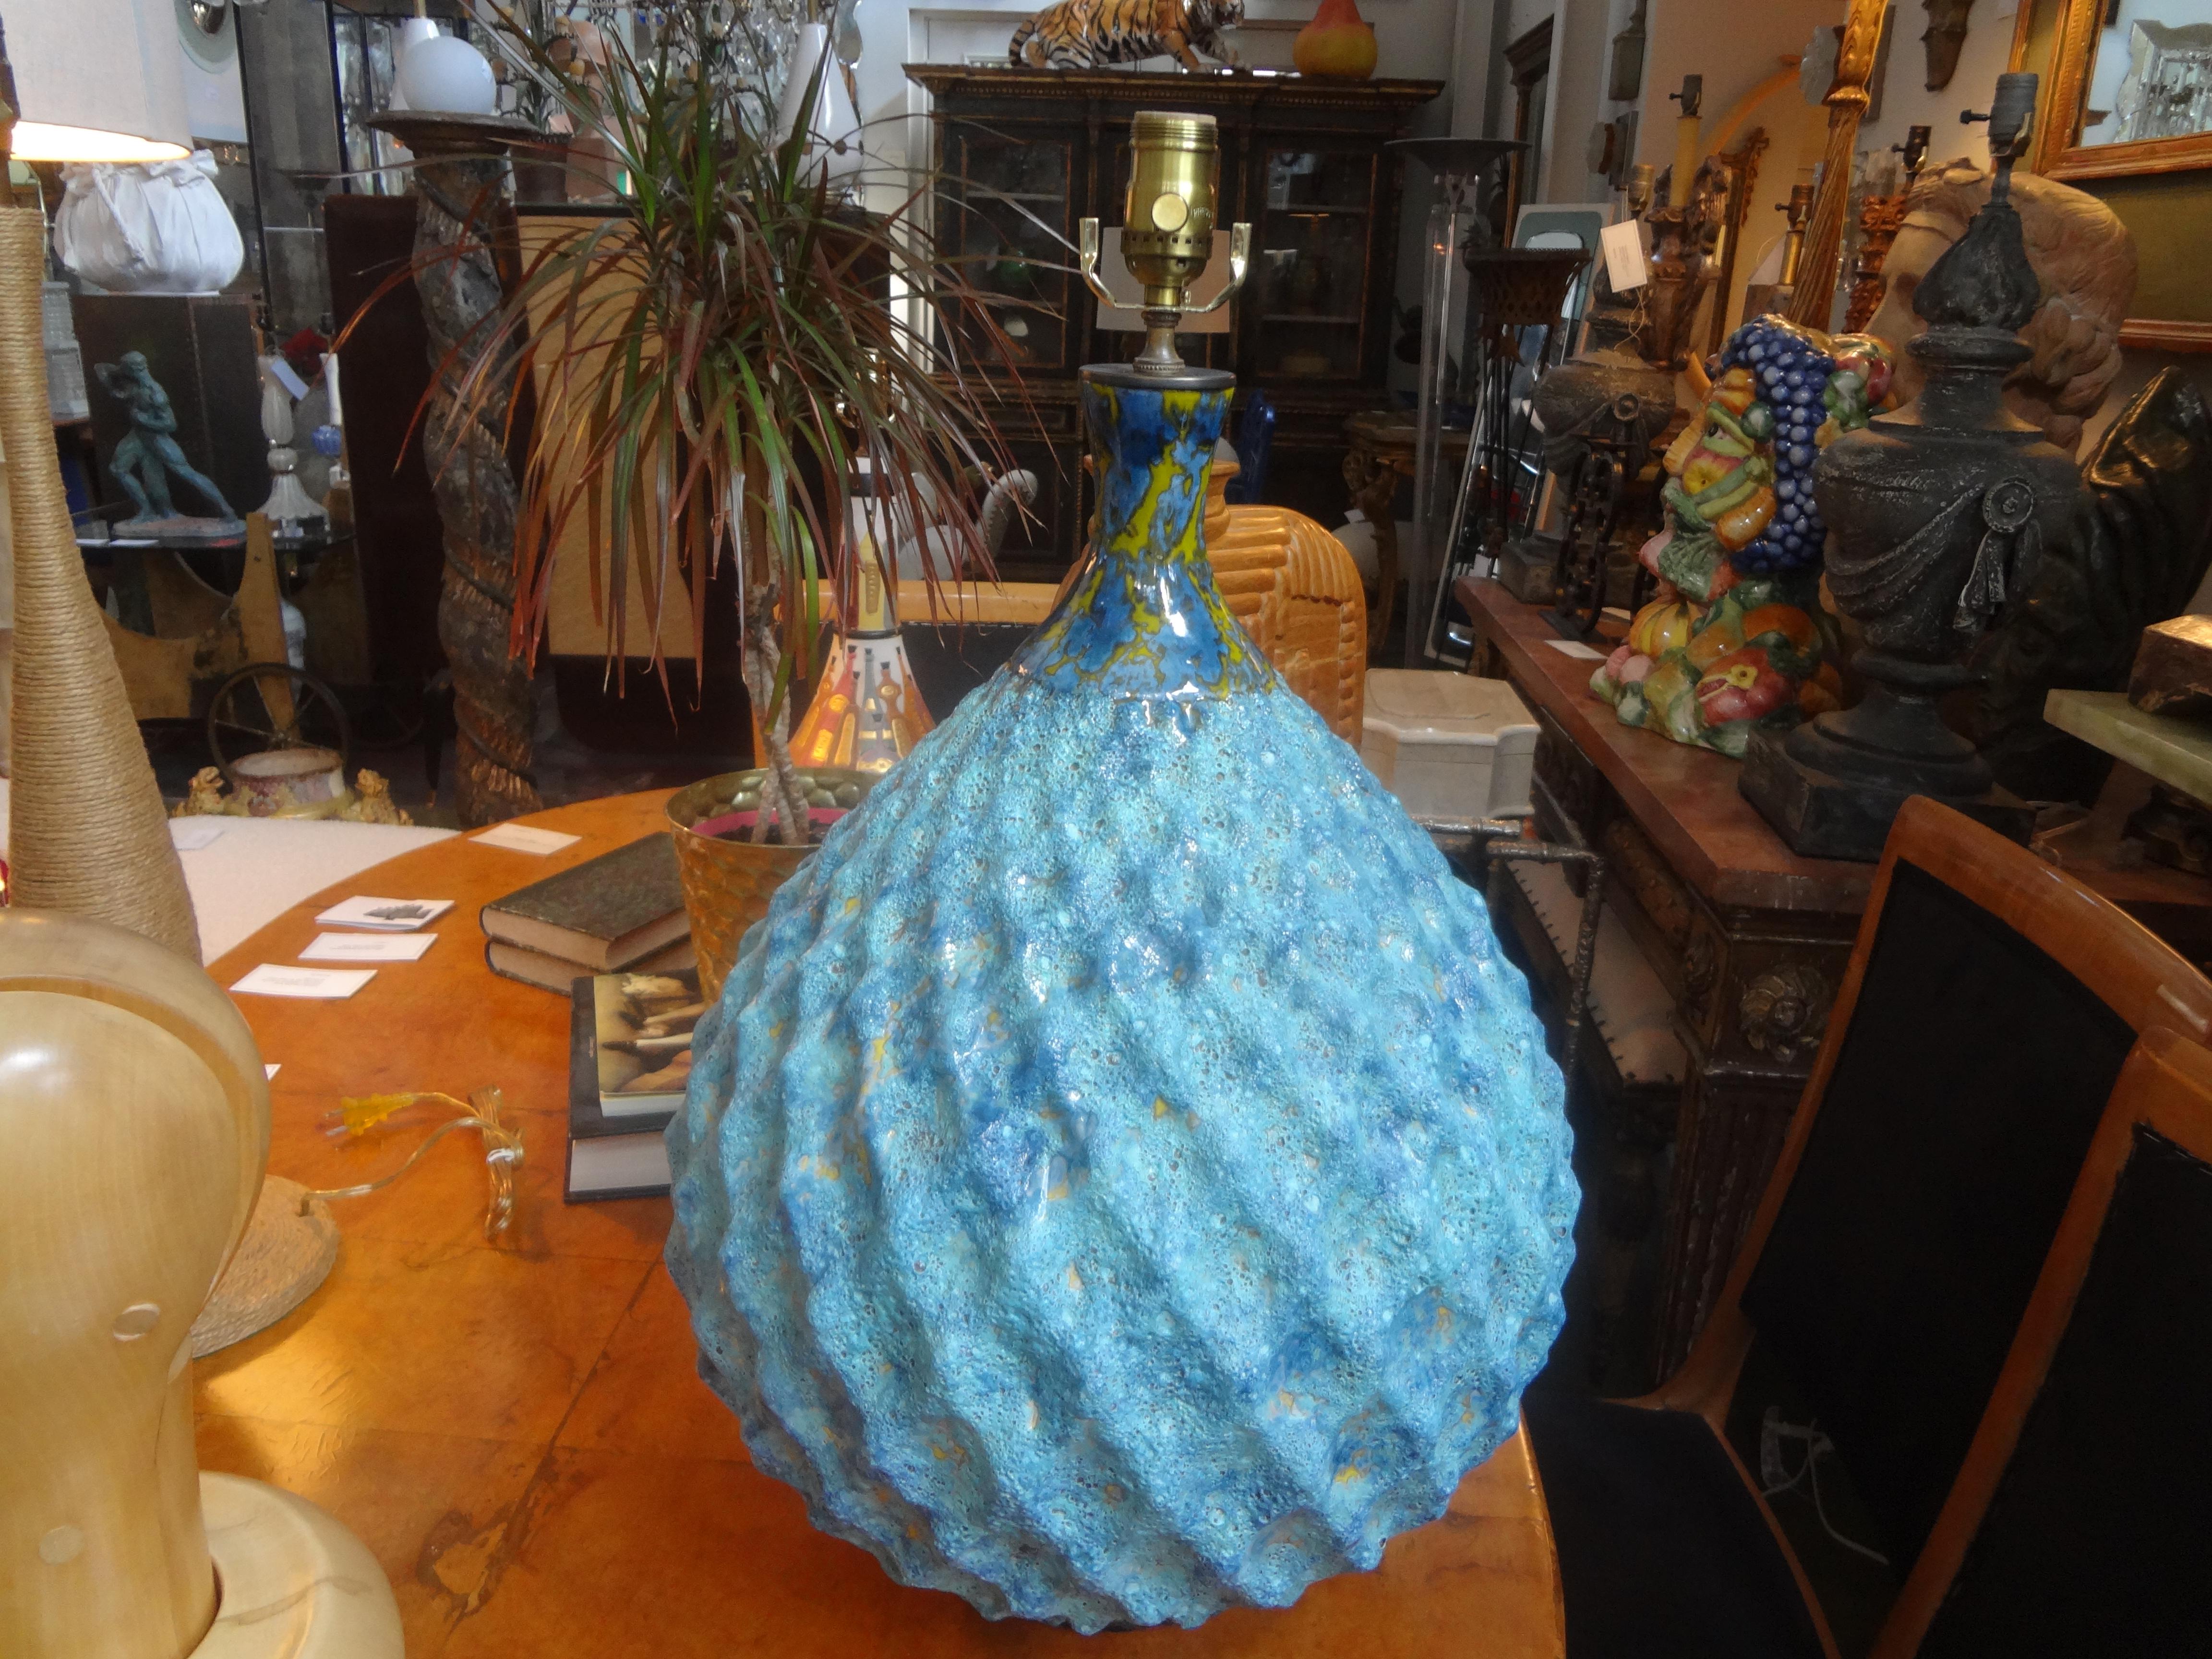 Midcentury glazed pottery artichoke lamp. This stunning vintage glazed pottery lamp has great color and texture and has been newly wired with new sockets.